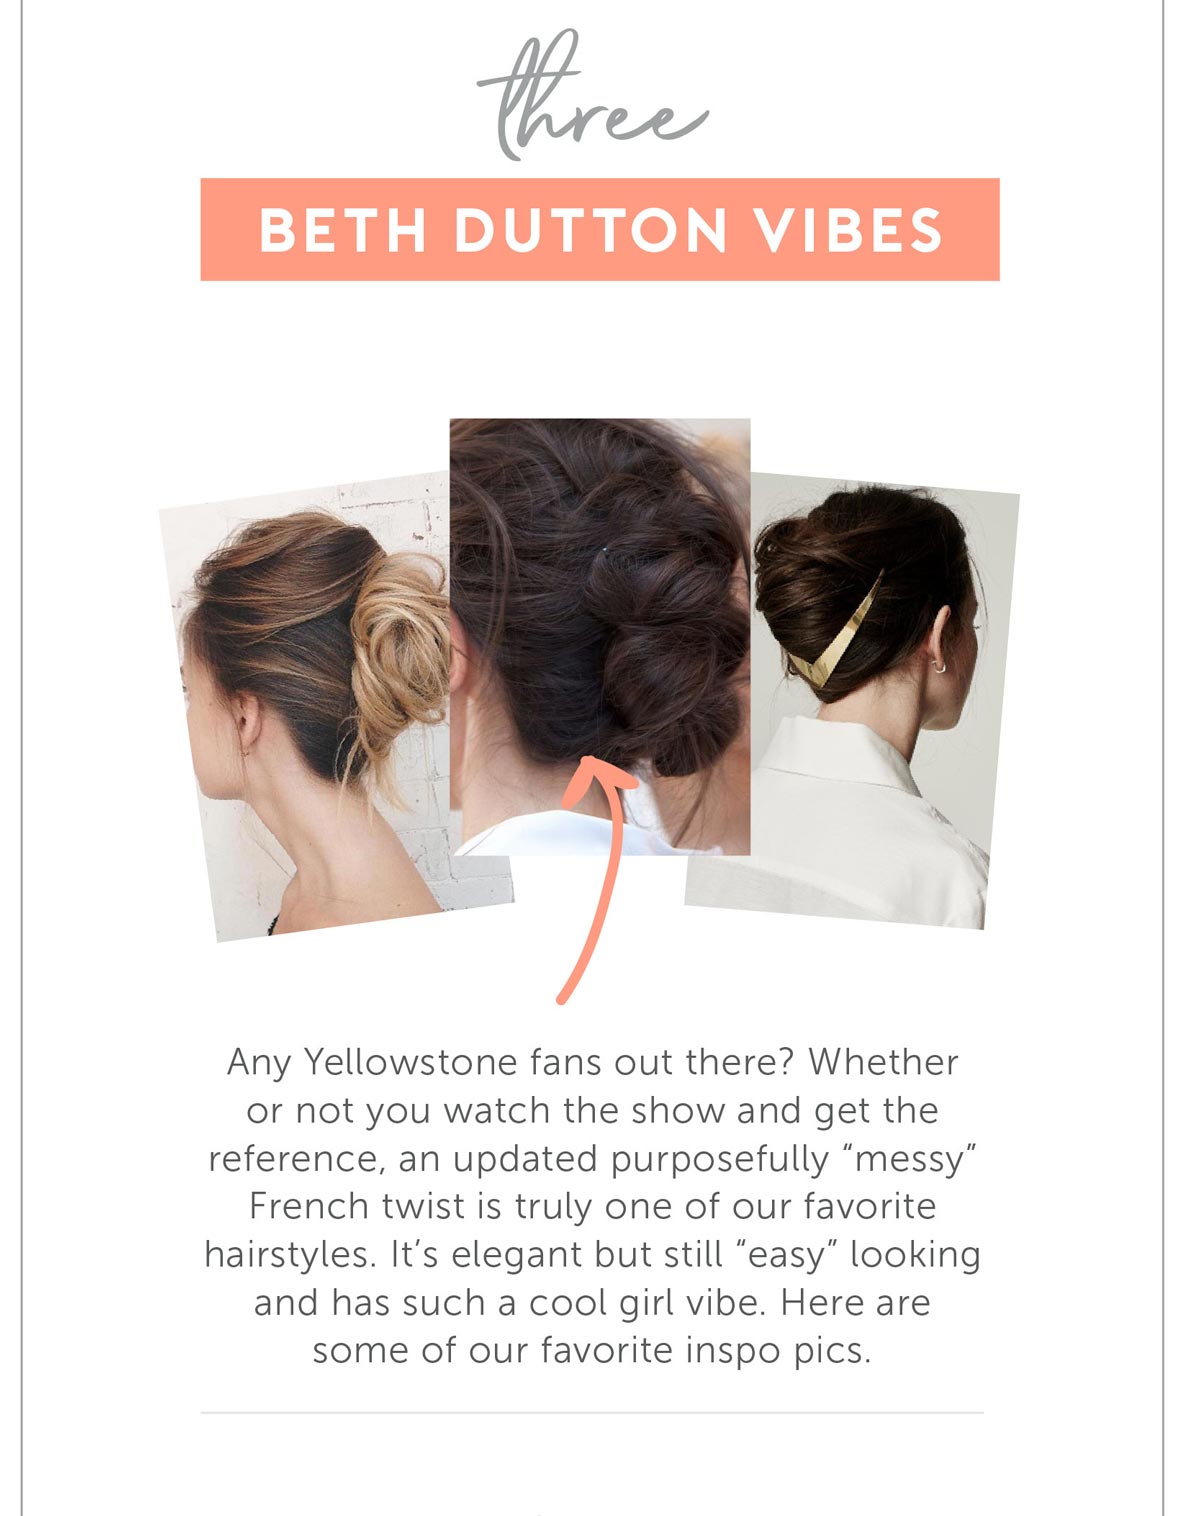 Beth Dutton vibes Any Yellowstone fans out there? Whether or not you watch the show and get the reference, an updated purposefully “messy” French twist is truly one of our favorite hairstyles. It’s elegant but still “easy” looking and has such a cool girl vibe. Here are some of our favorite inspo pics.